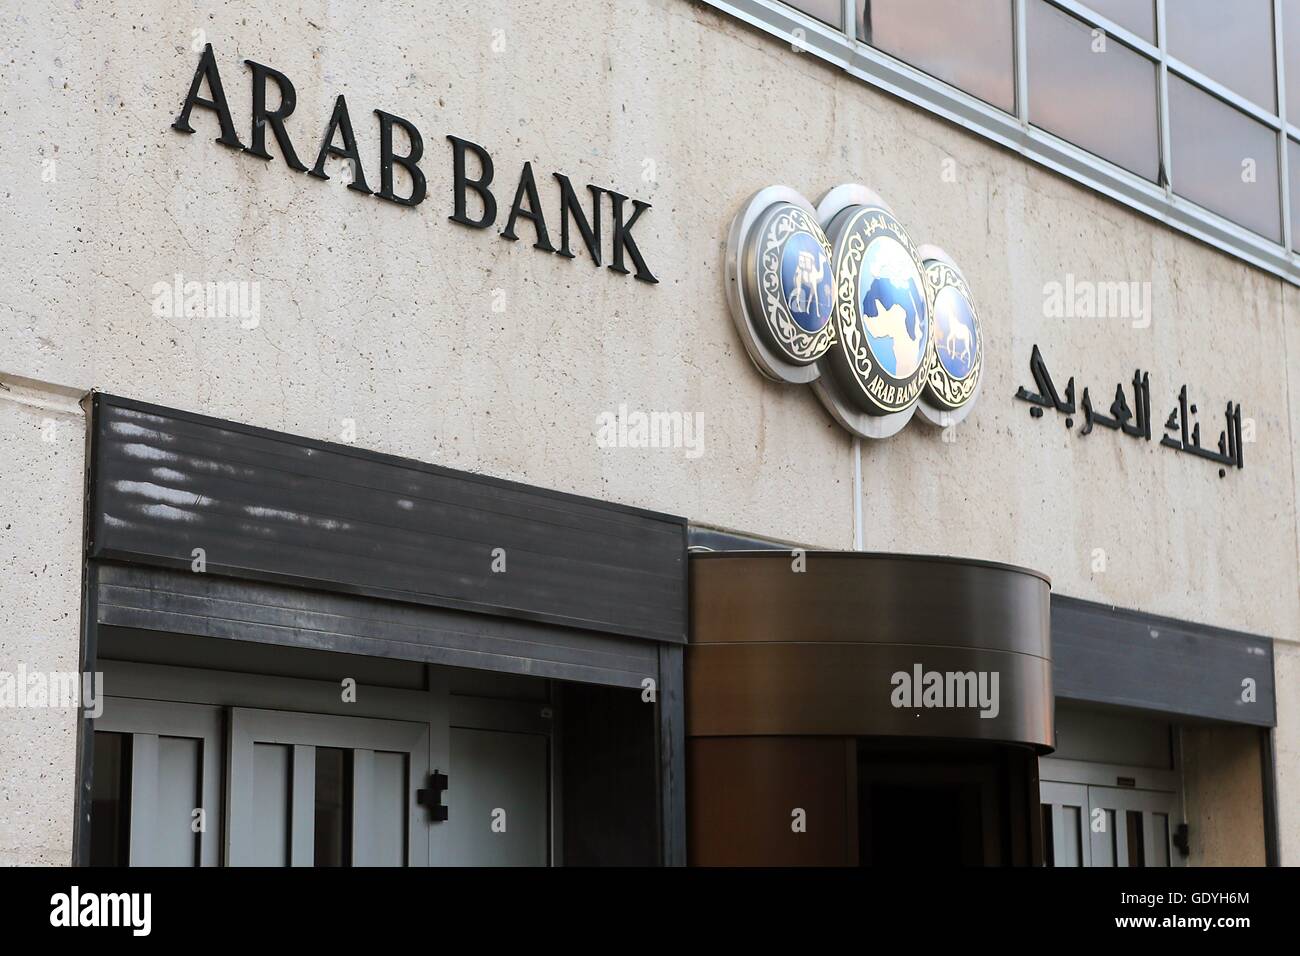 The ARAB BANK Amman, capital of Jordan is one of largest and most important financial institutions in the Middle East. February 2016 | worldwide Stock Photo - Alamy